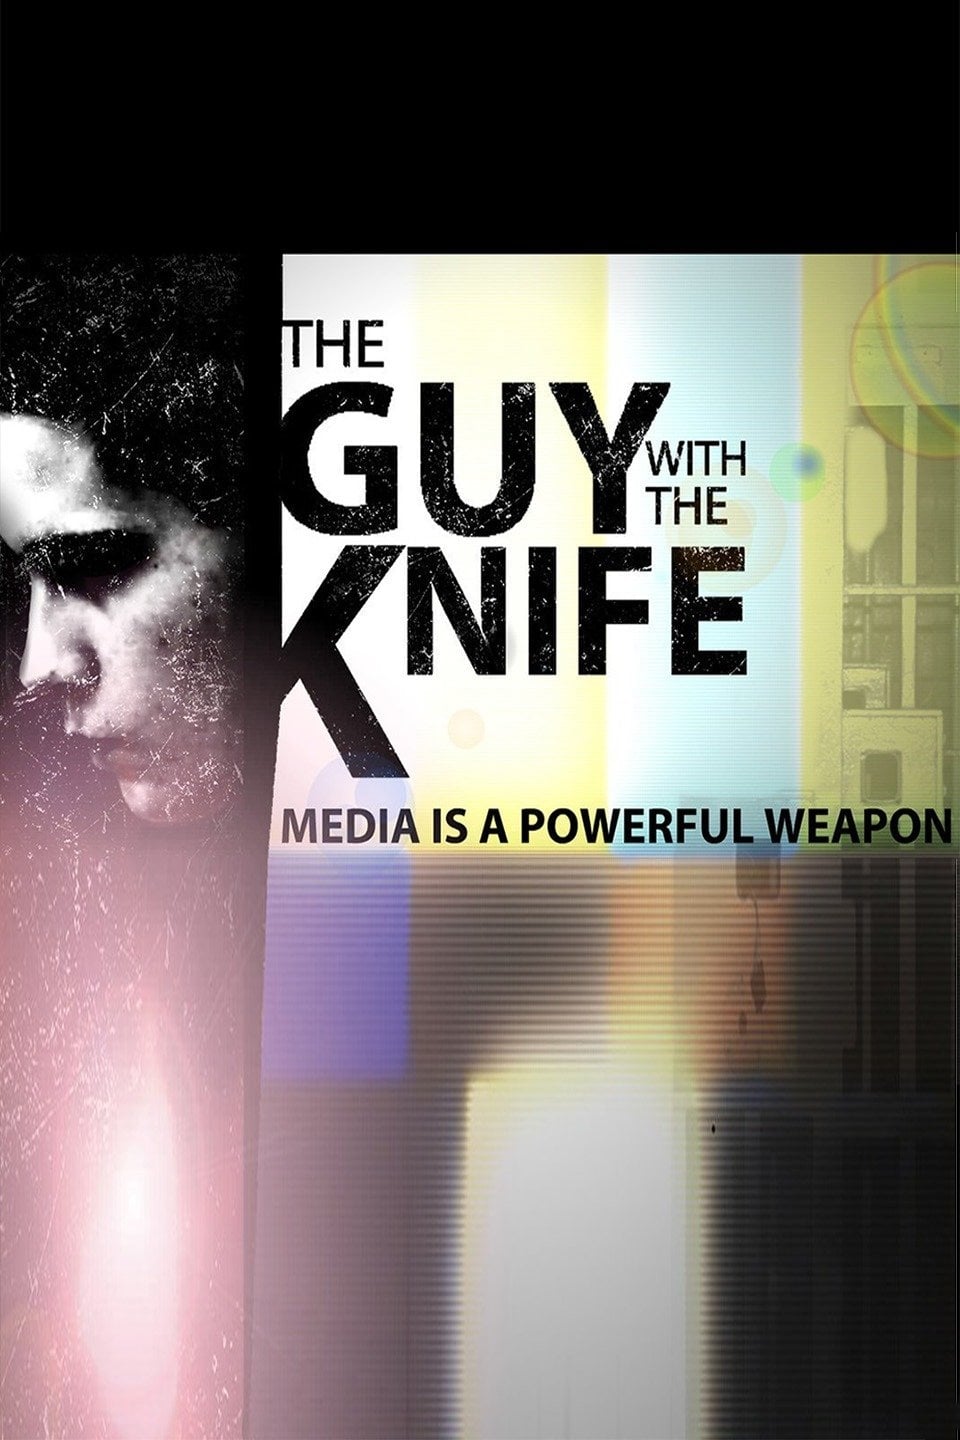 The Guy with the Knife